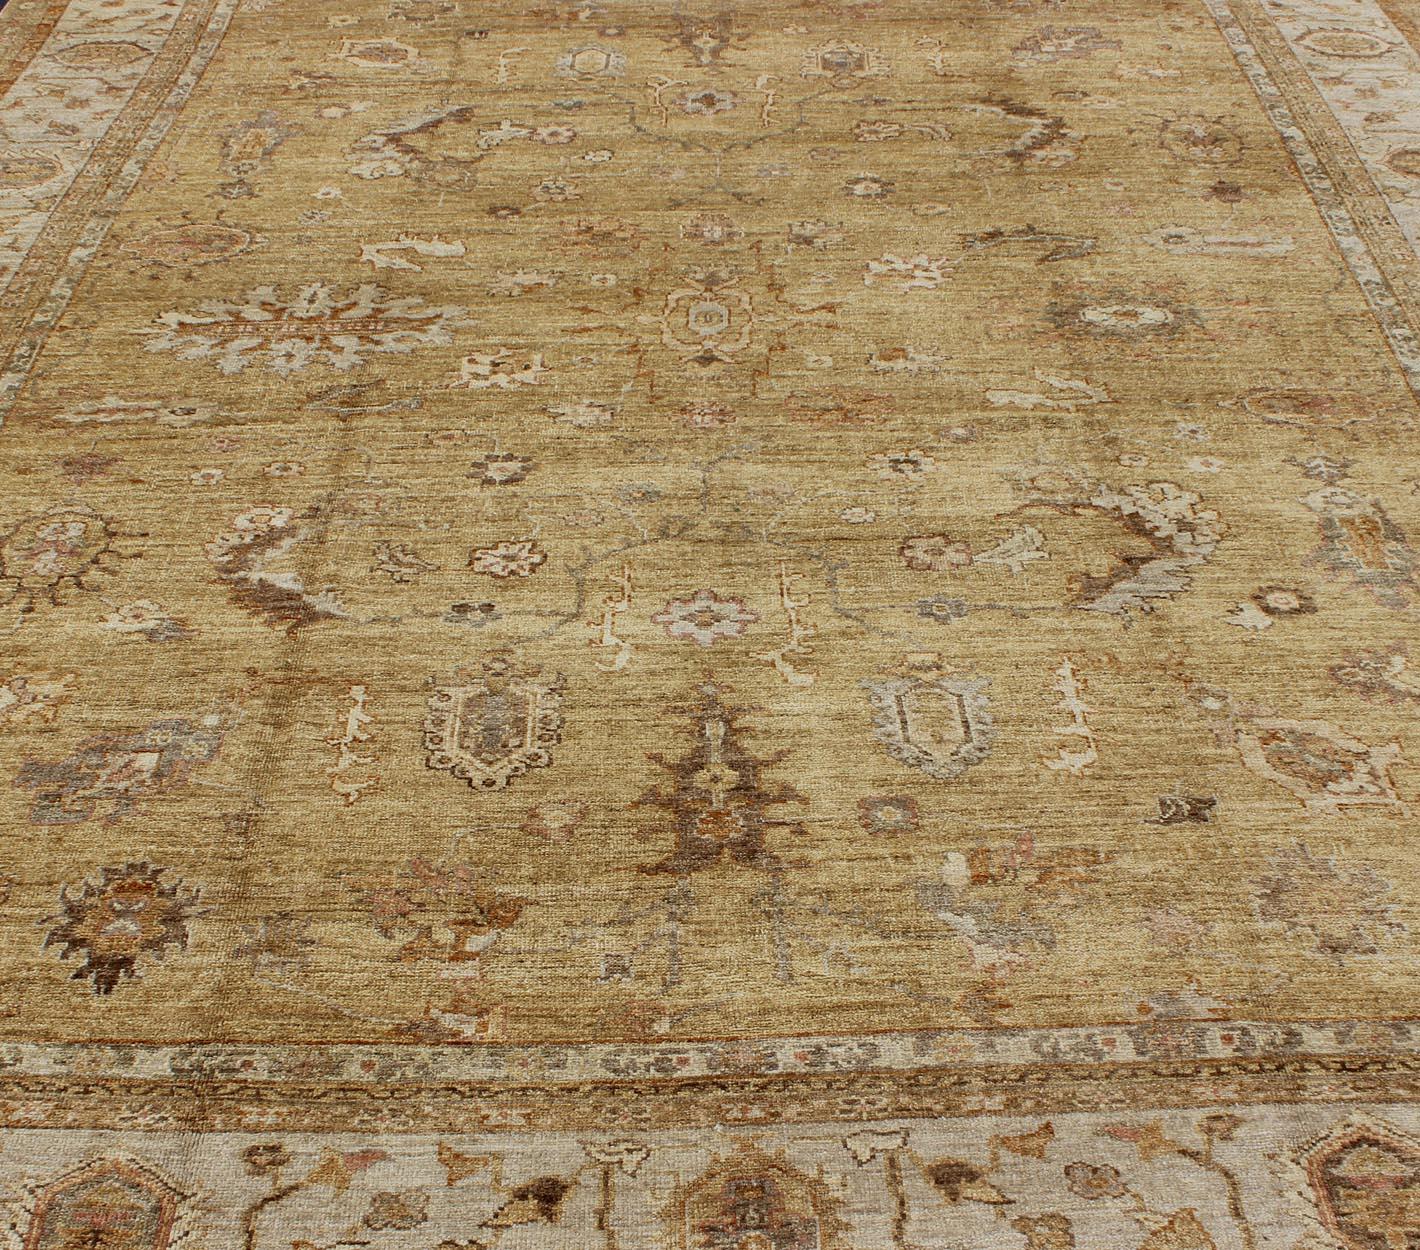 Contemporary Large Angora Oushak Turkish Rug in Warm Colors of Taupe, Soft Gold, Brown, Cream For Sale